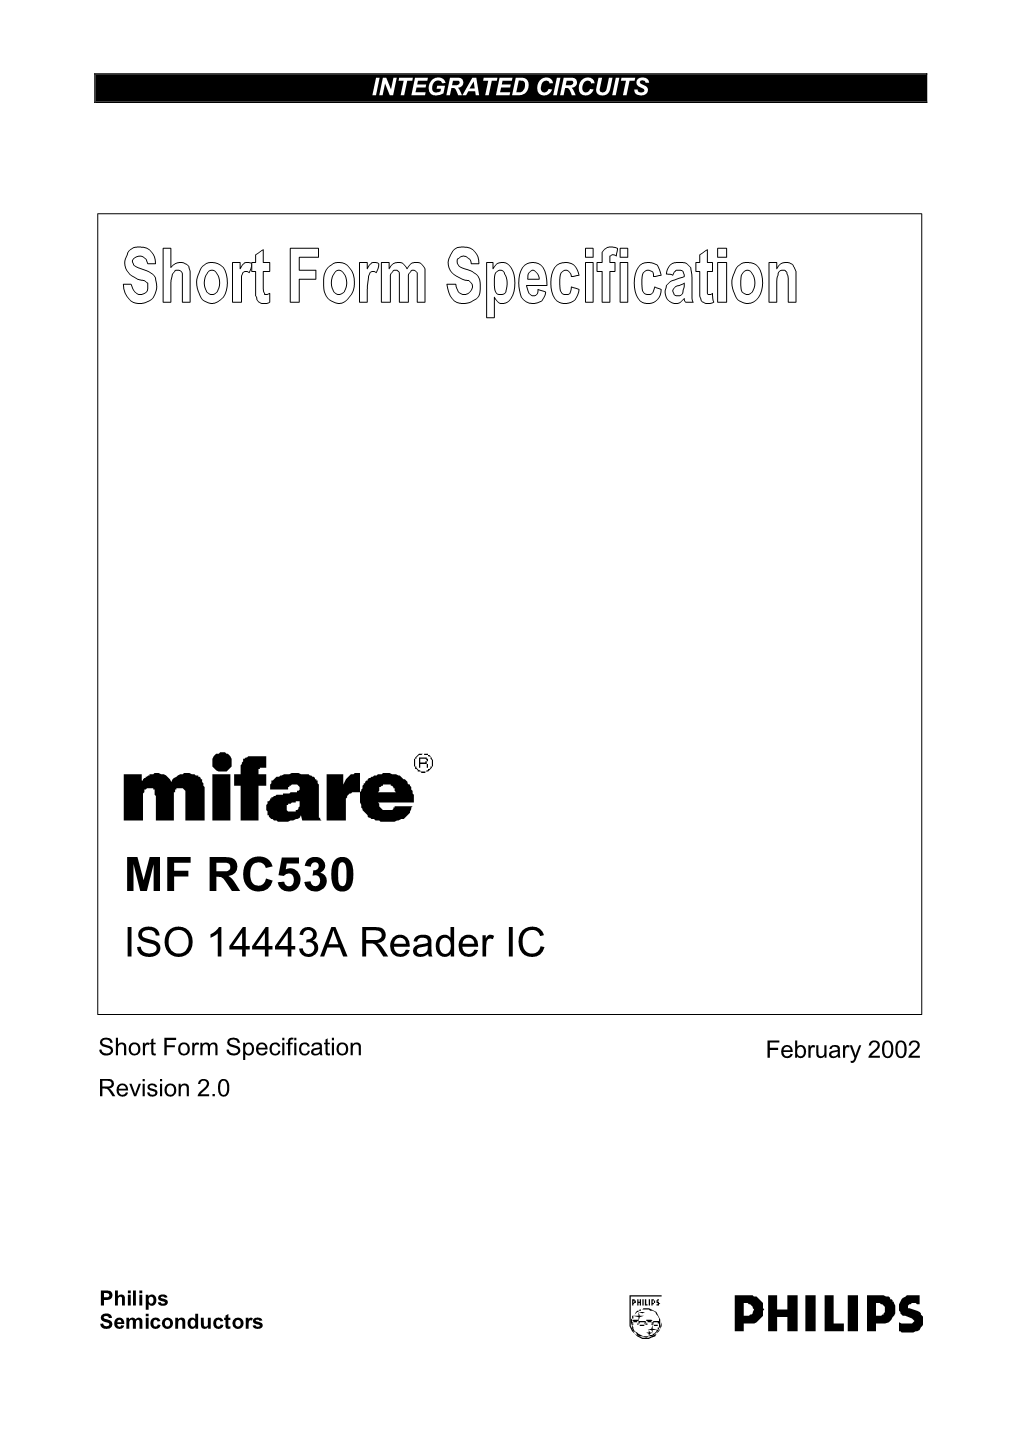 MF RC530 ISO 14443A Reader IC